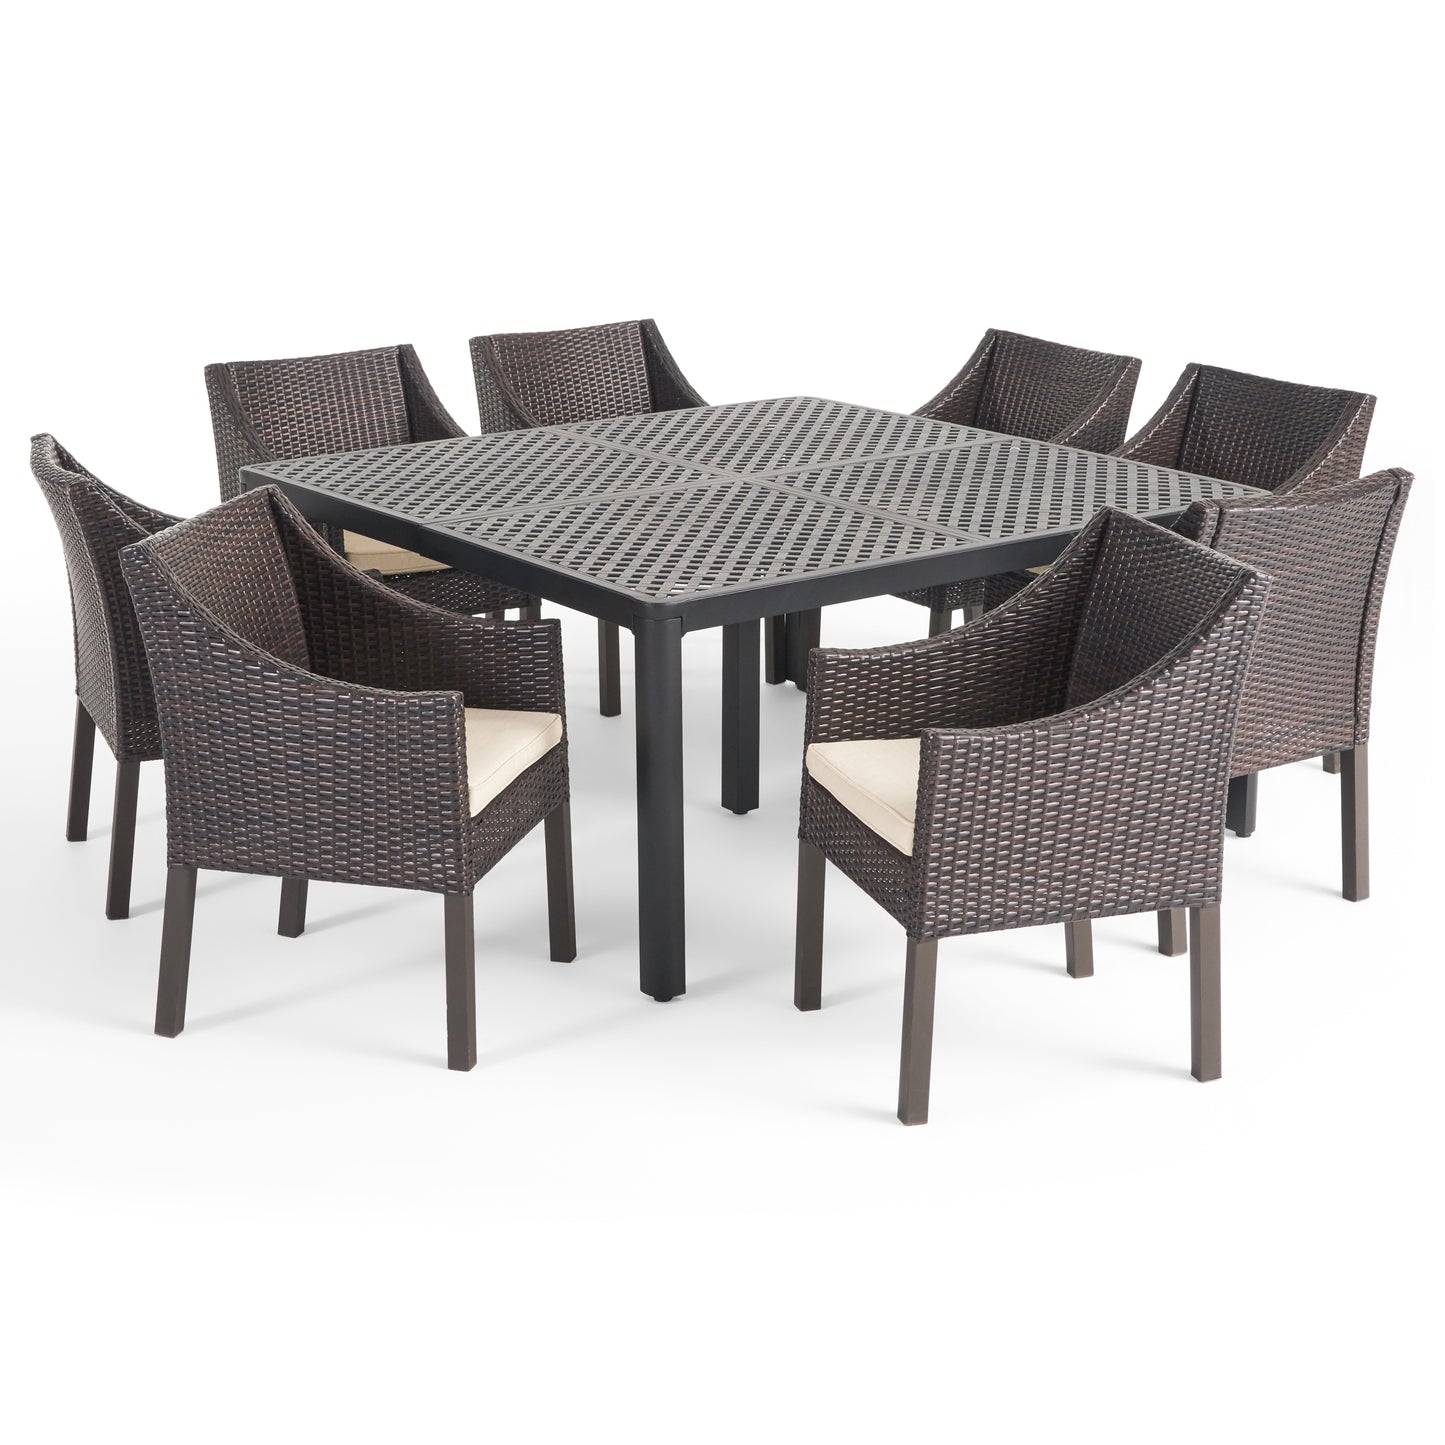 Megan Outdoor Aluminum and Wicker 8 Seater Dining Set